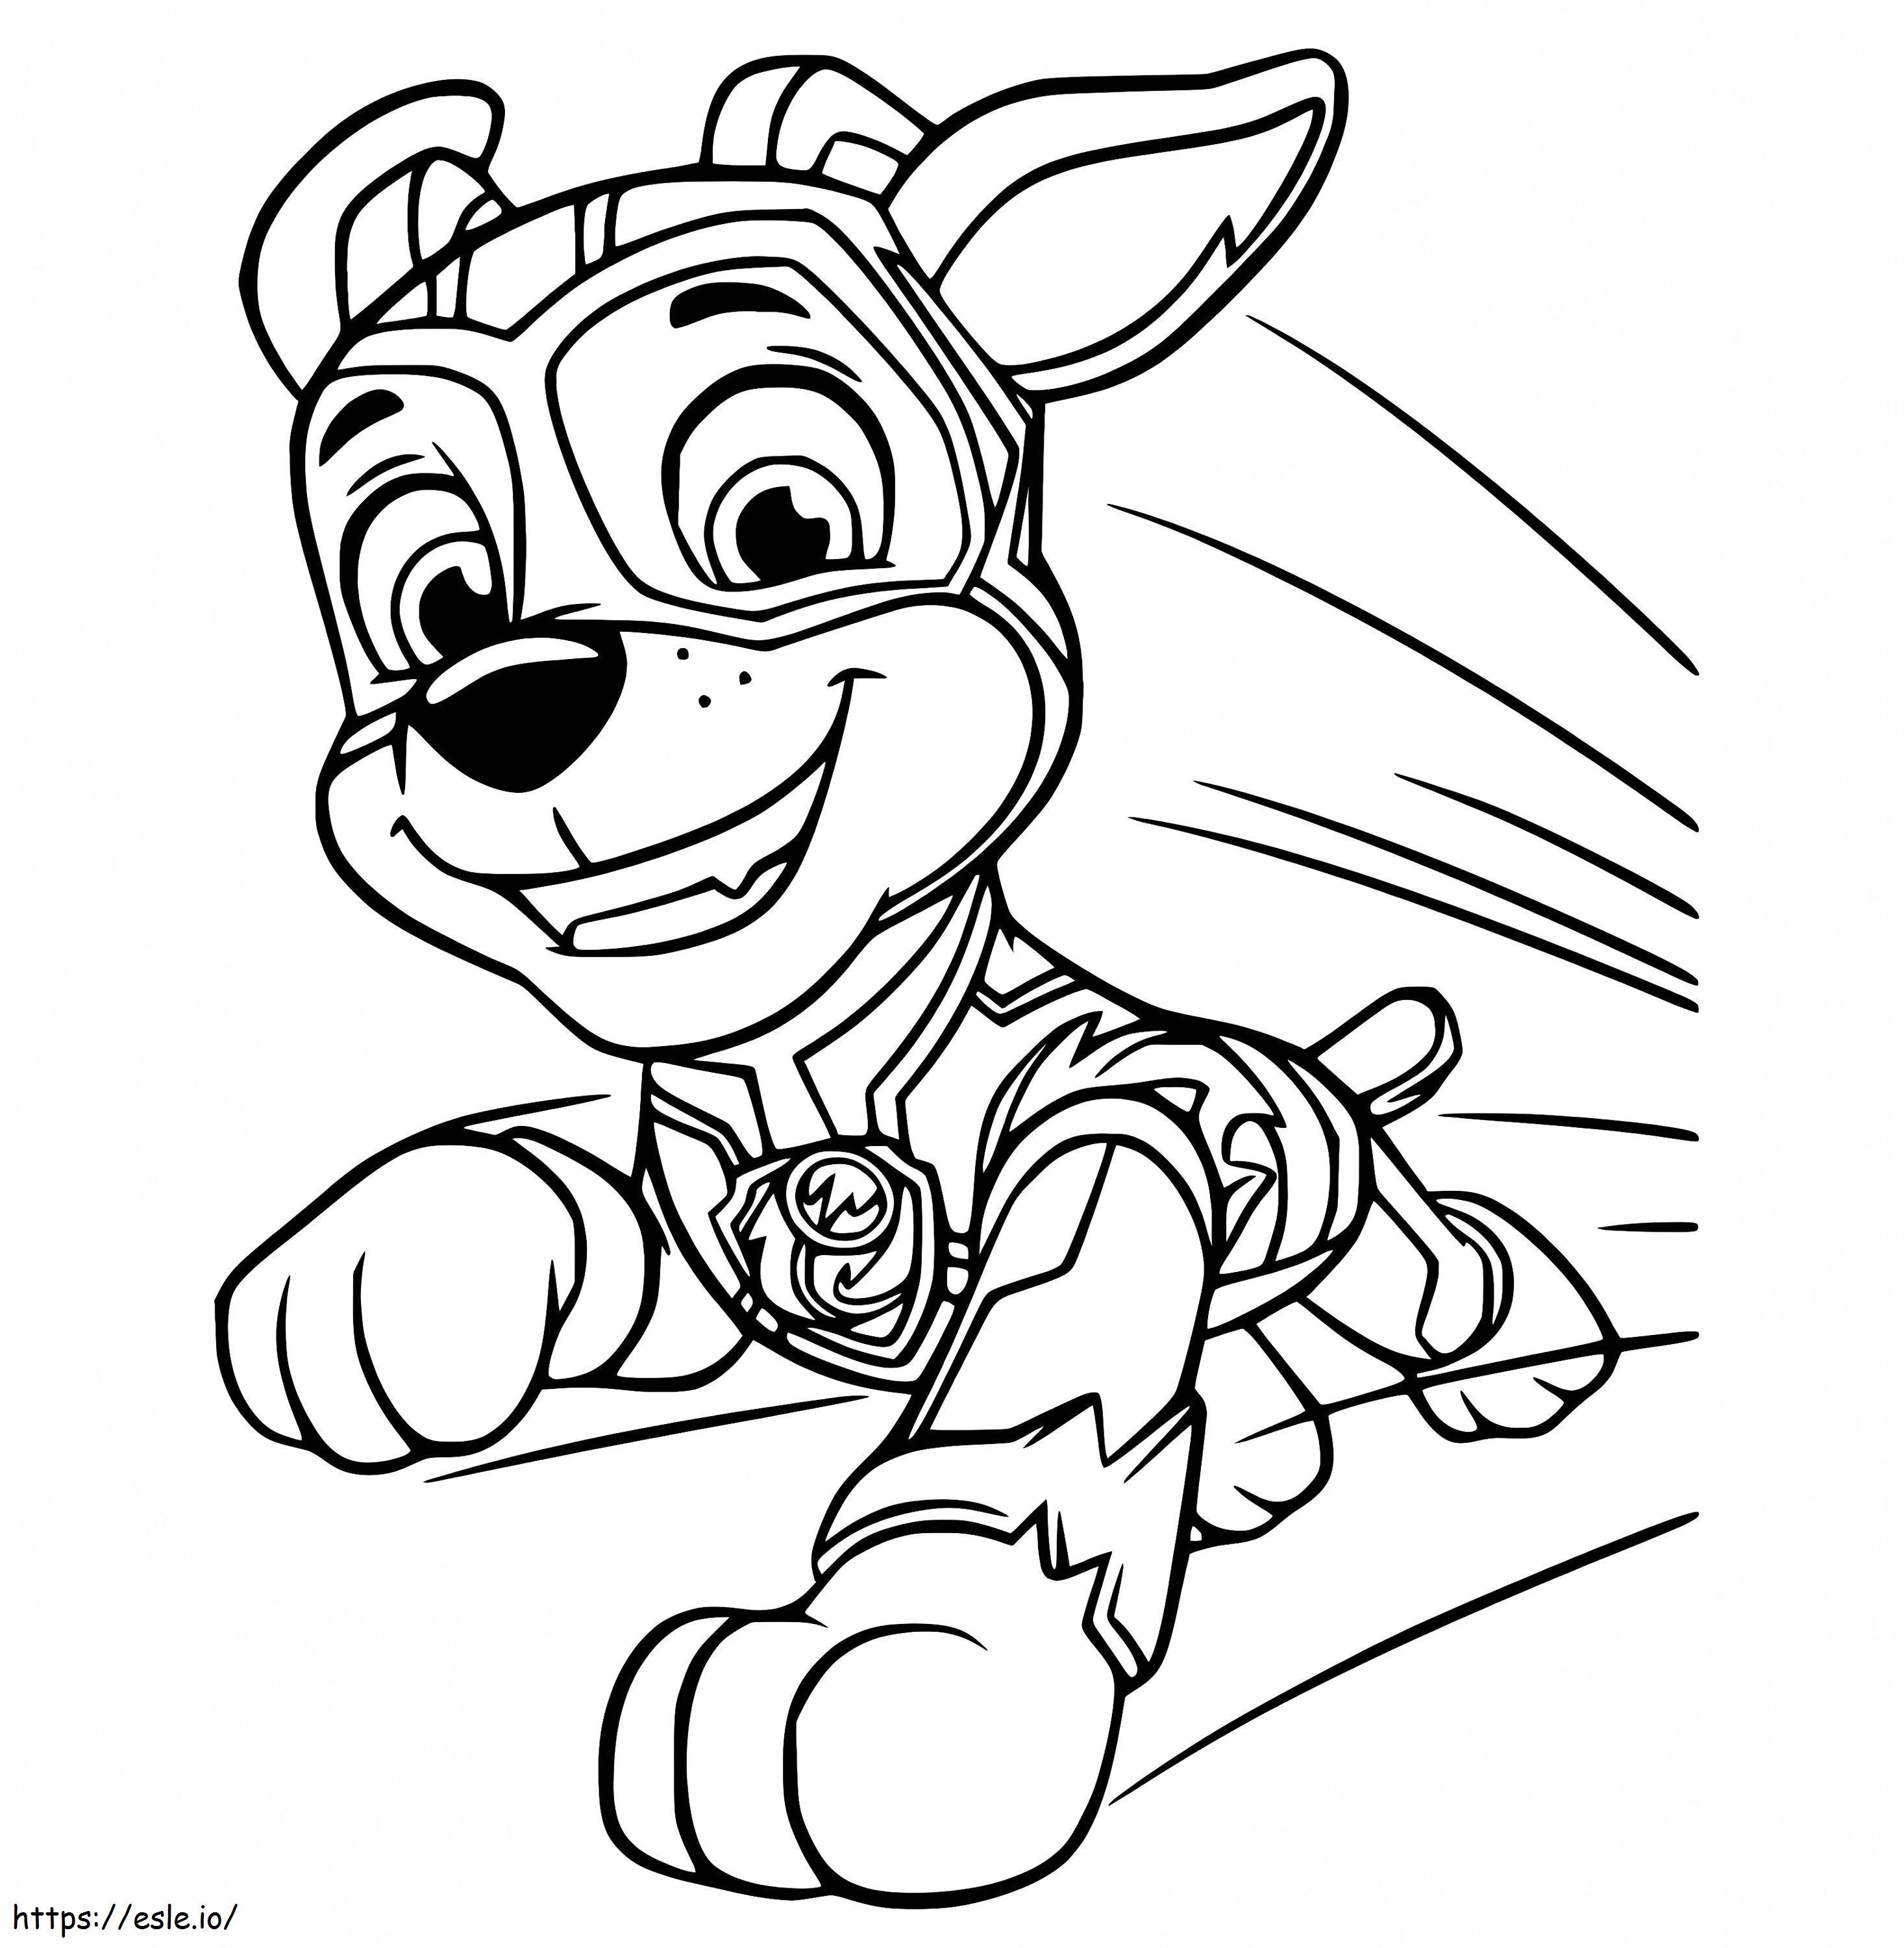 Tracker Super Fast coloring page